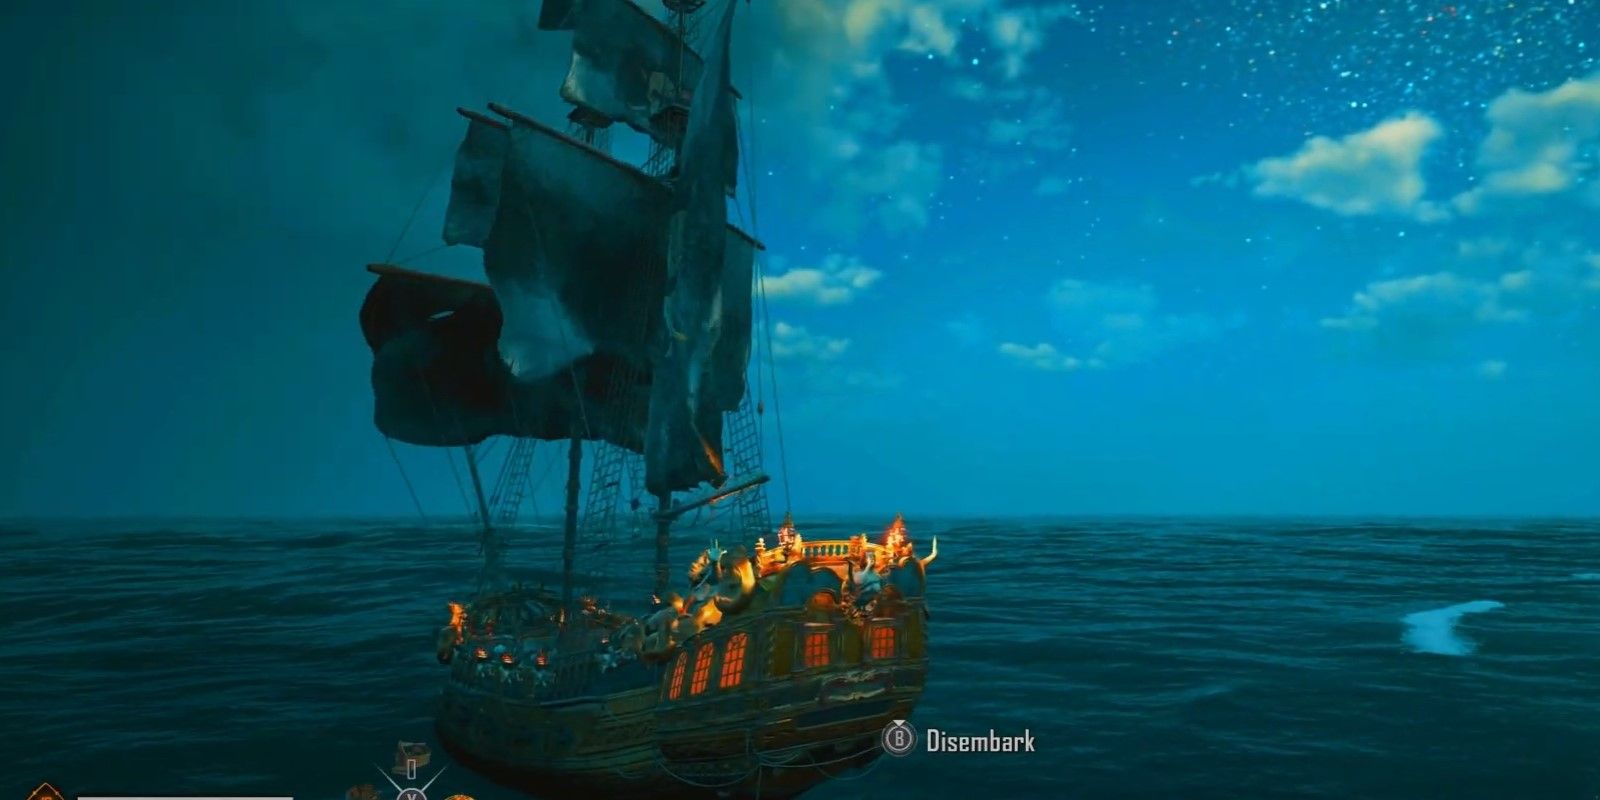 The Skull And Bones character is sailing at night under the stars to find the Maangodin Ghost Ship.